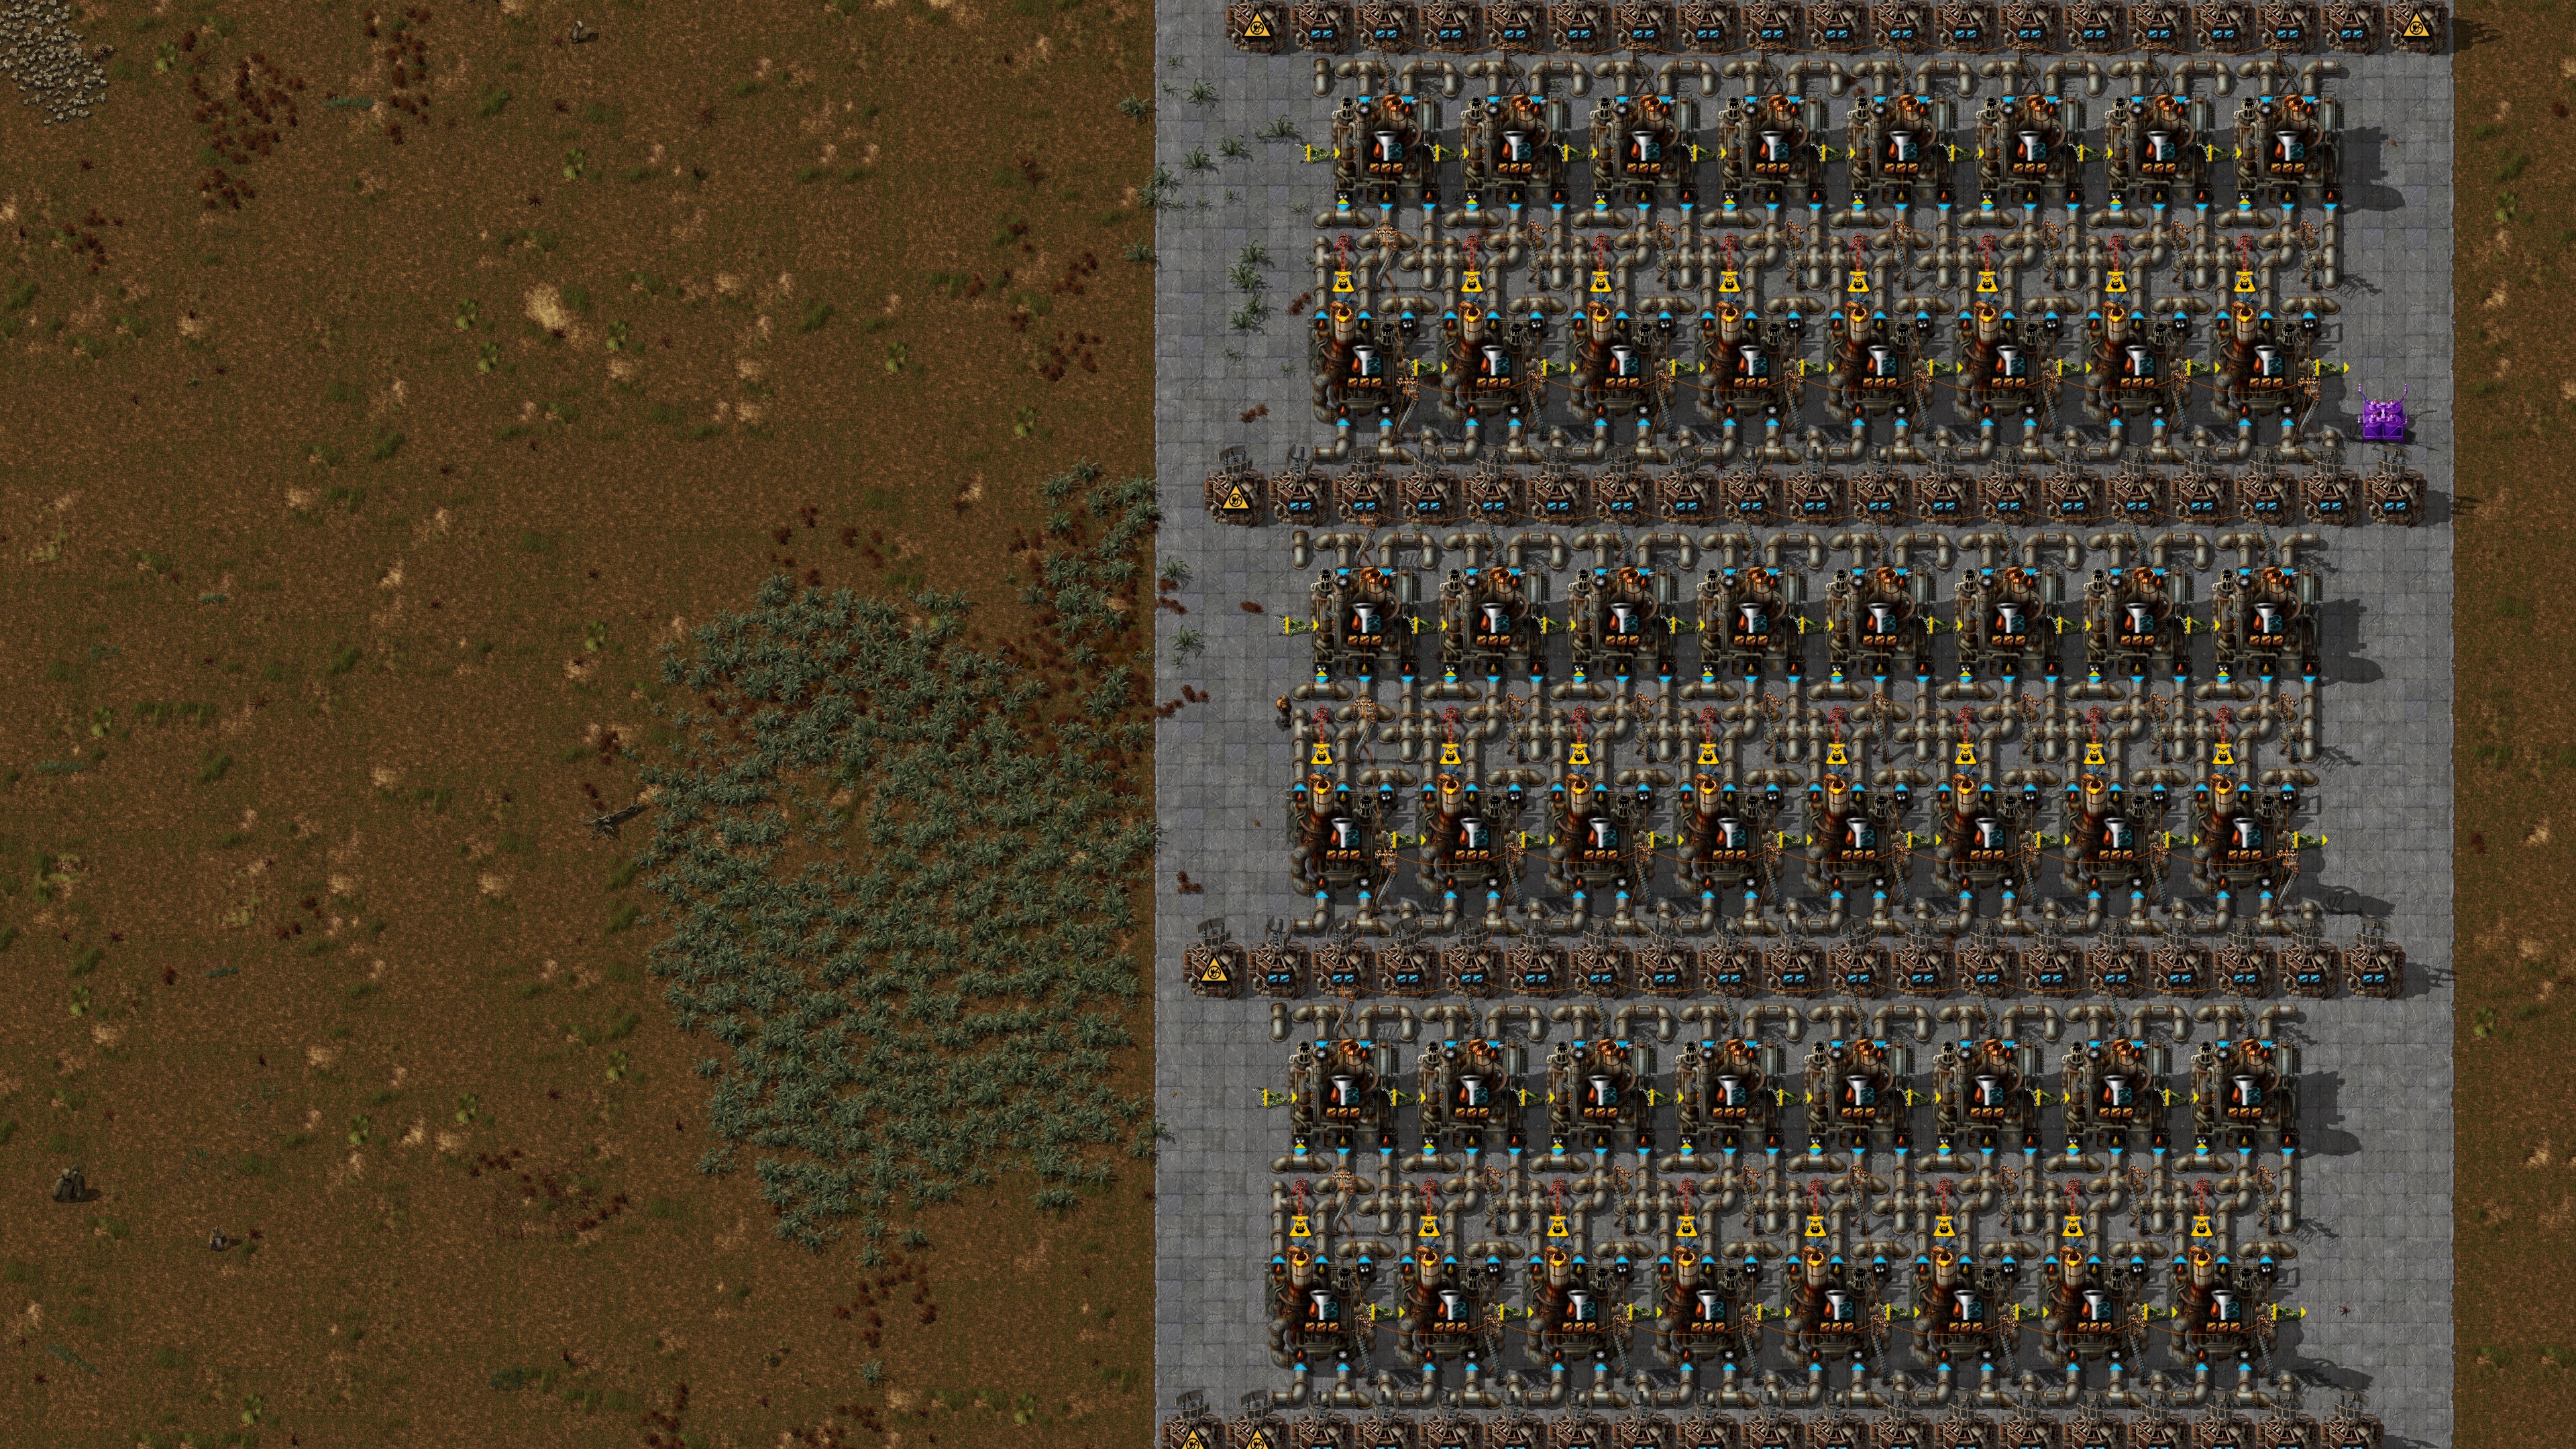 Slightly more compact, fewer bots needed